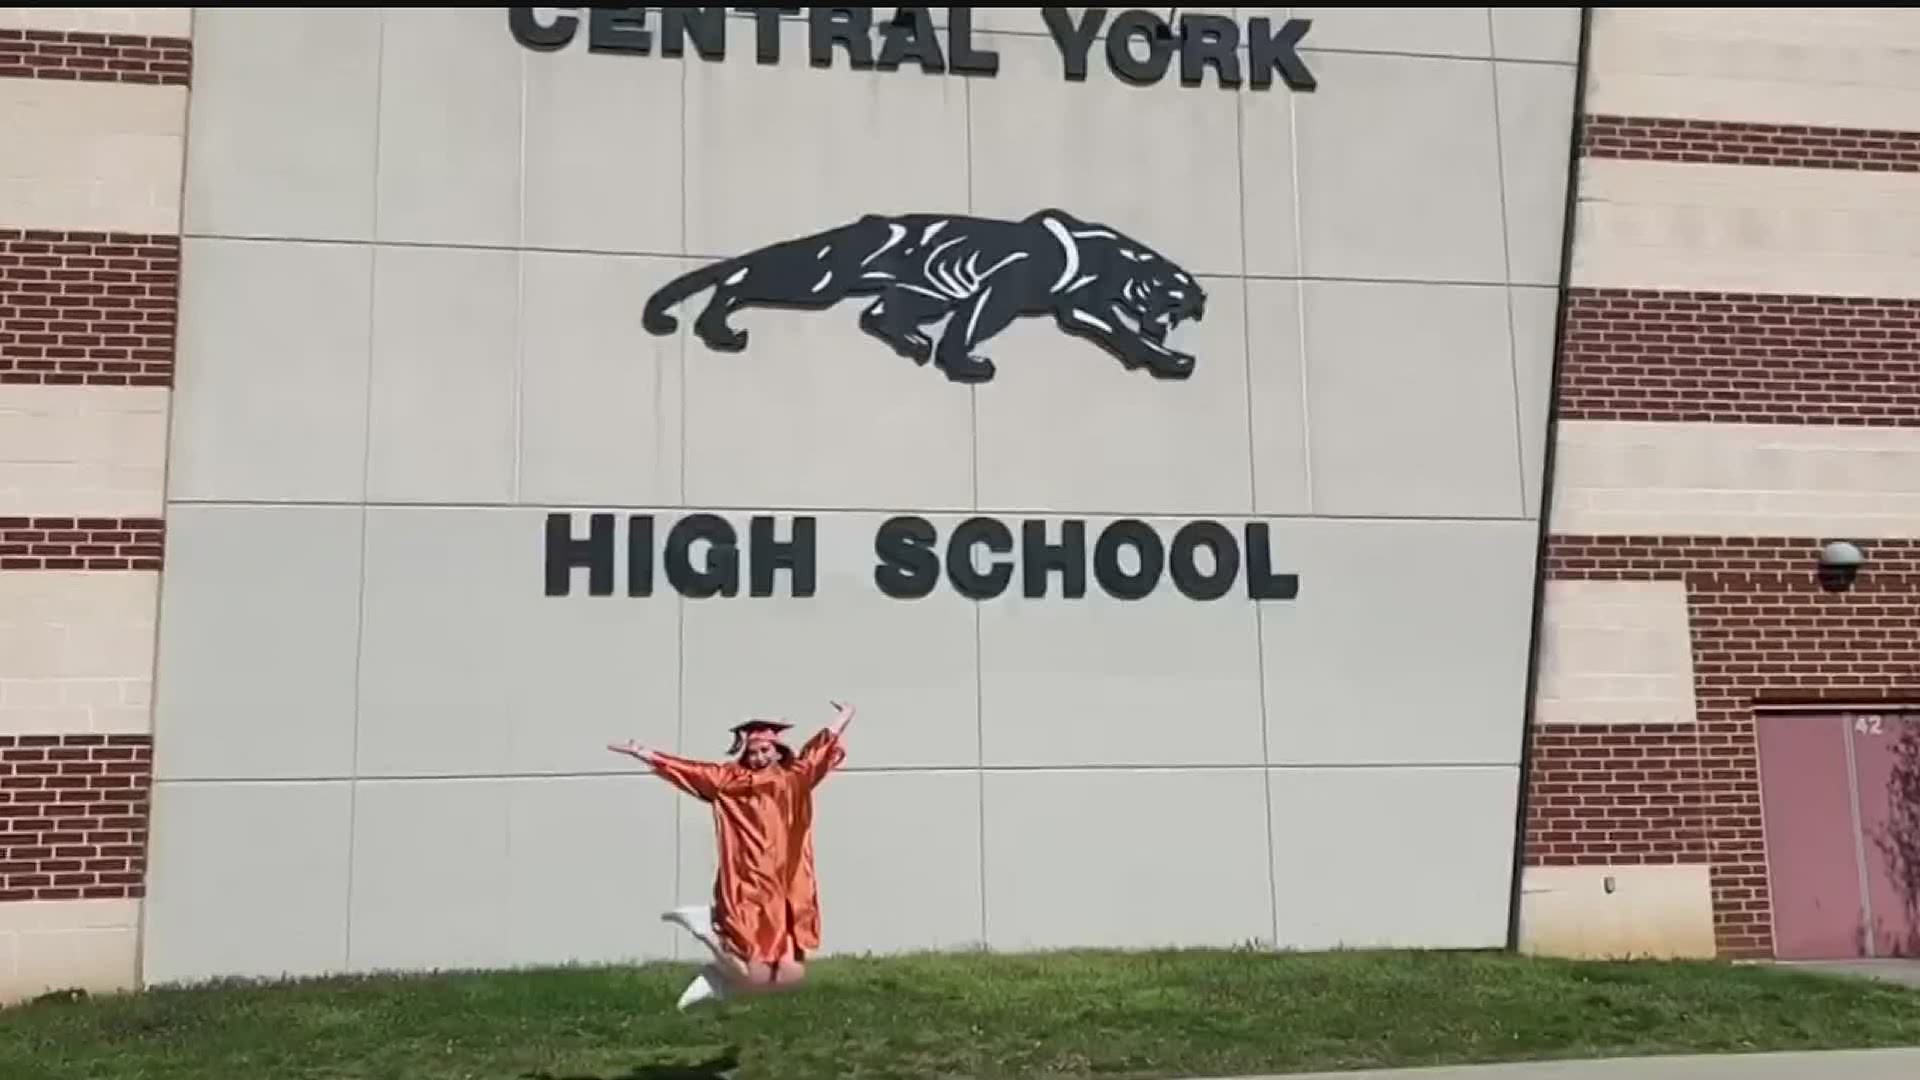 A Central York High School senior and her family made a light-hearted video of her walking alone at graduation, while trying to keep everyone's spirits up.